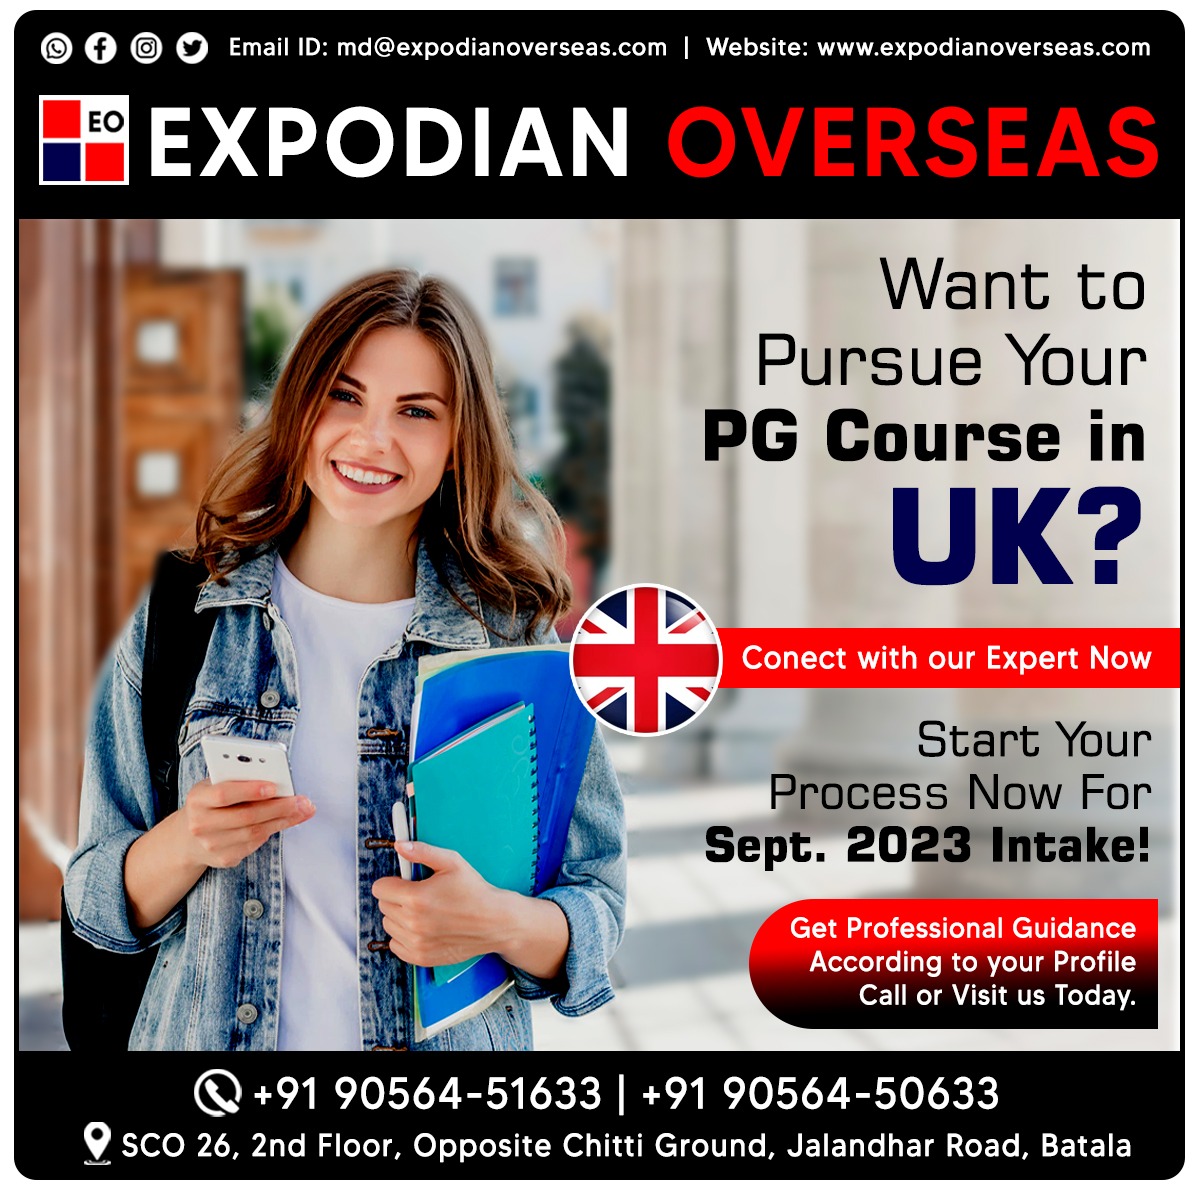 Pursue your Master's Course in UK. Get admission in UK's Top Universities with or without IELTS.. For more information, Contact Expodian Overseas Best UK Study Visa Consultant in Batala at +91 9056450633.
#ukvisaapplication #ukwithoutielts #ukspouseopenworkpermit #ukvisa